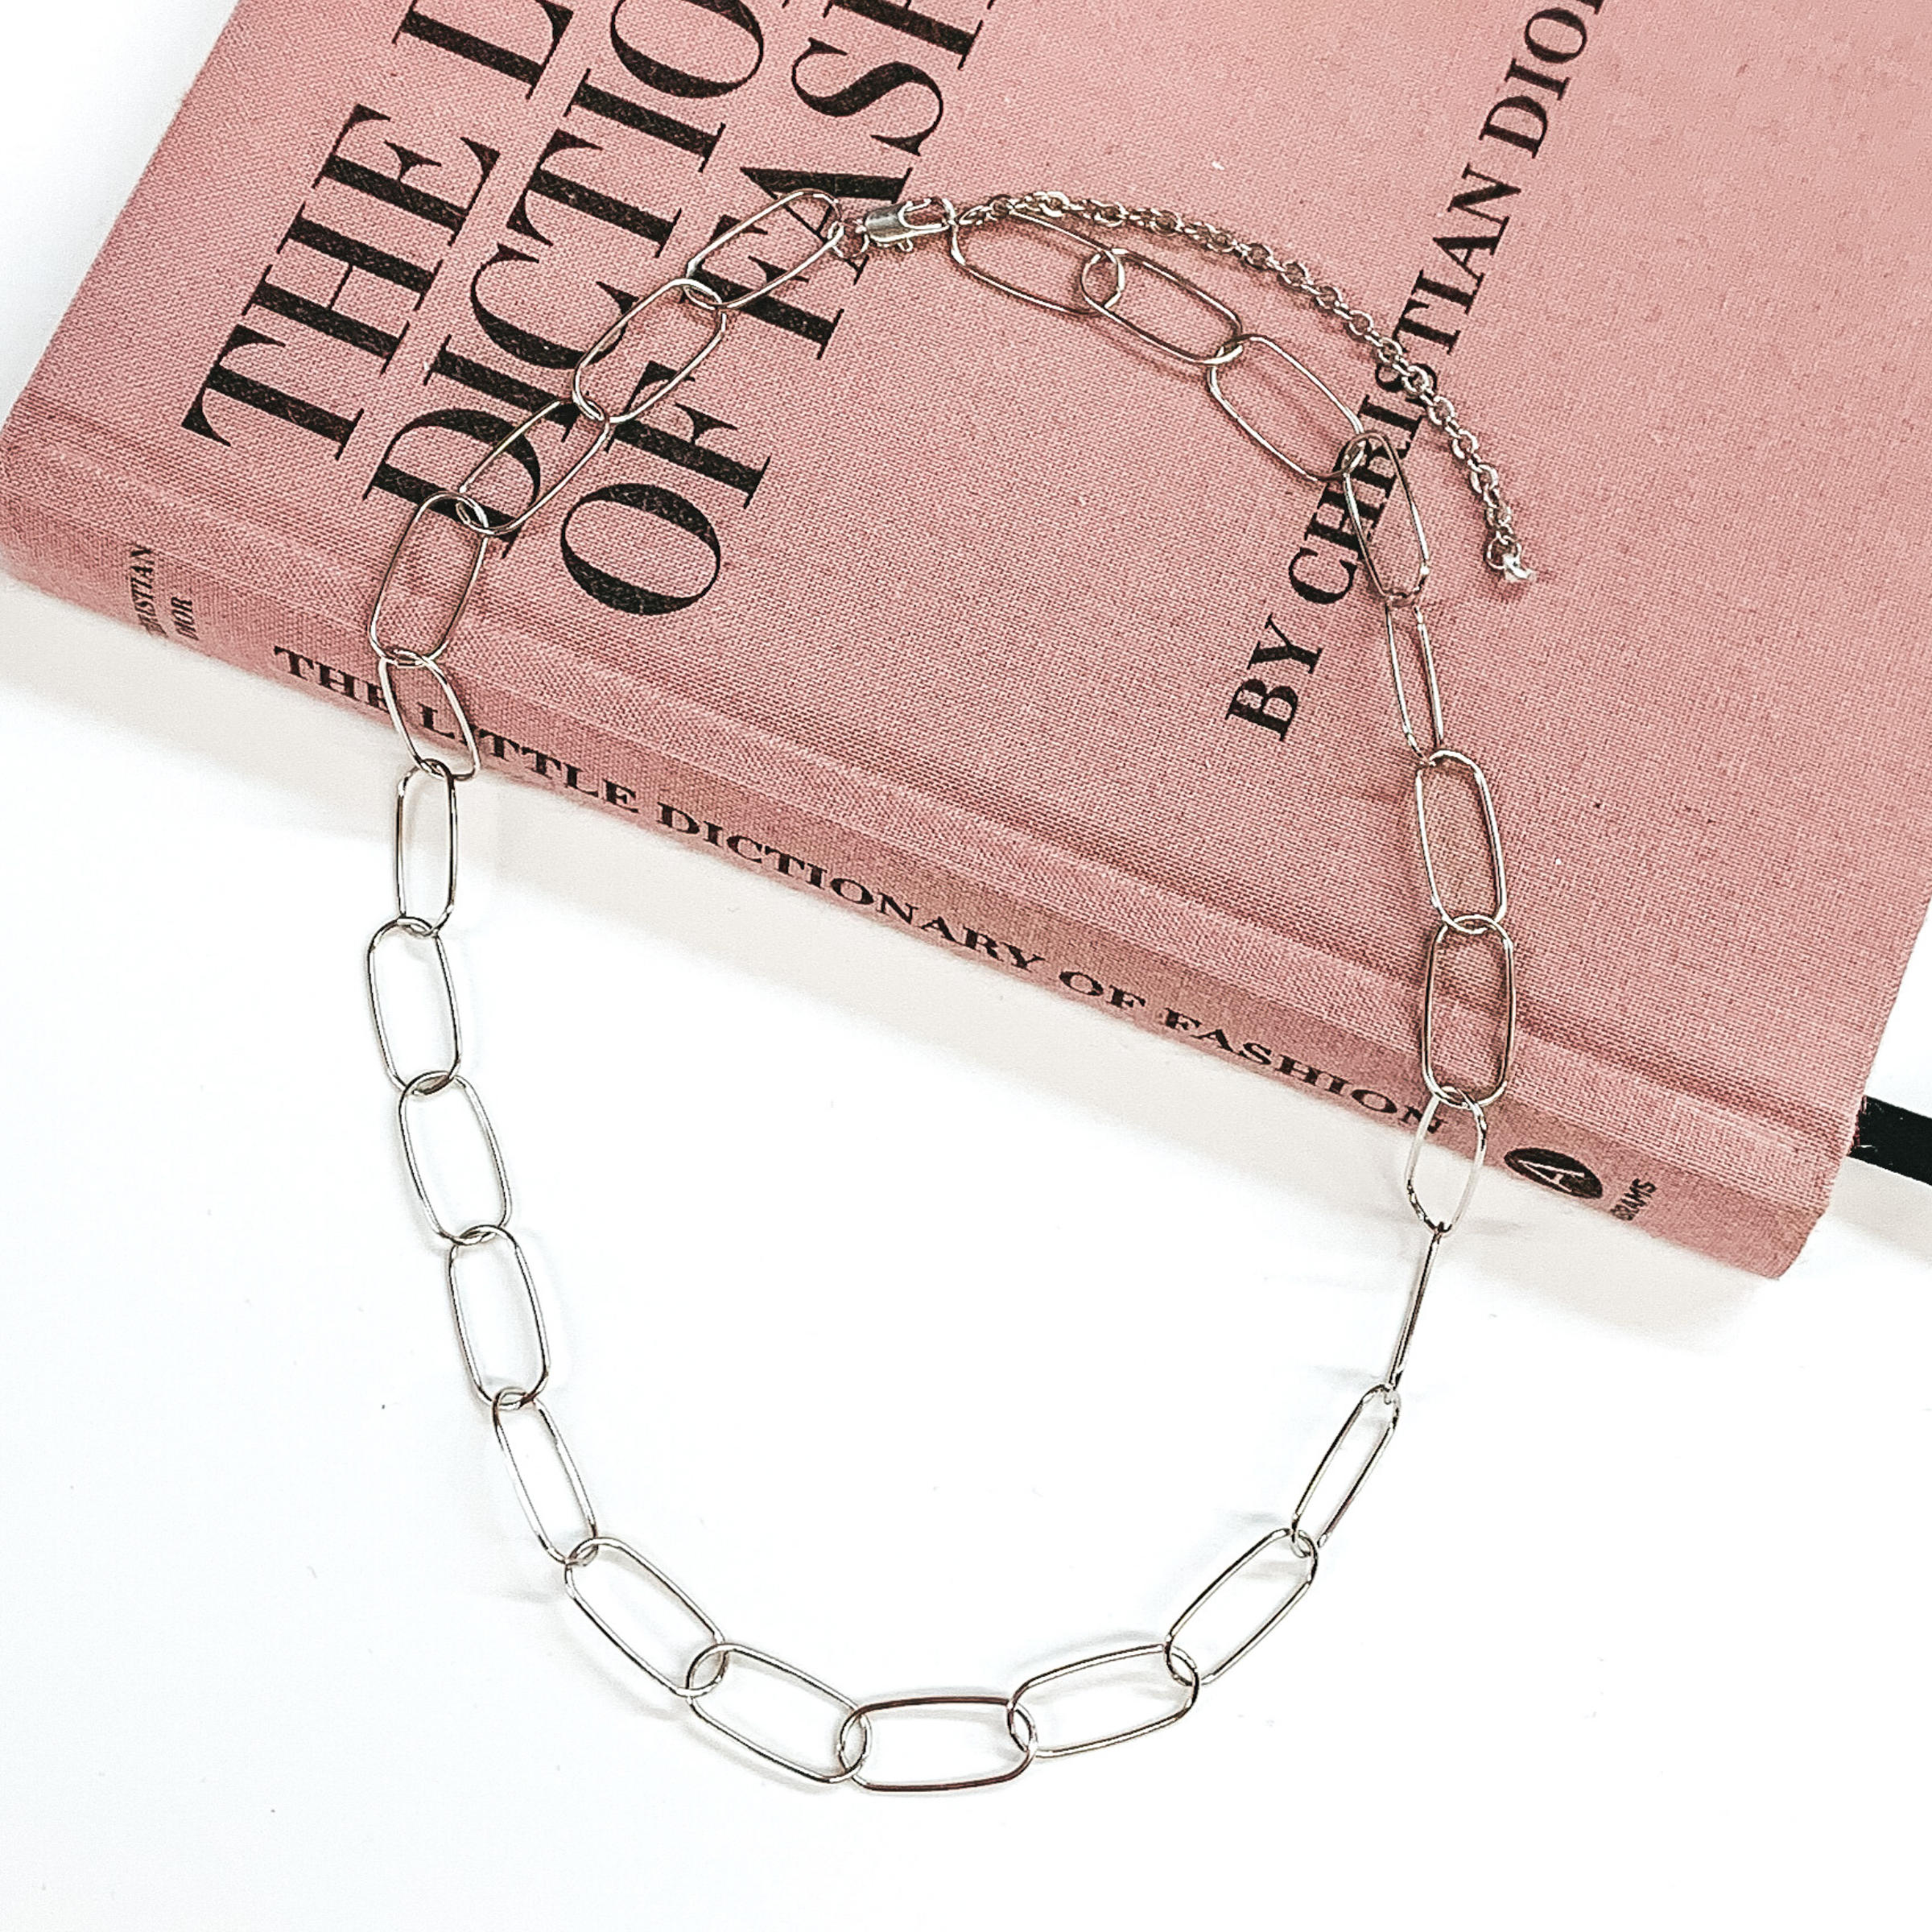 Thin, paperclip chain in silver. This necklace is pictured laying partially on a mauve colored book on a white background. 